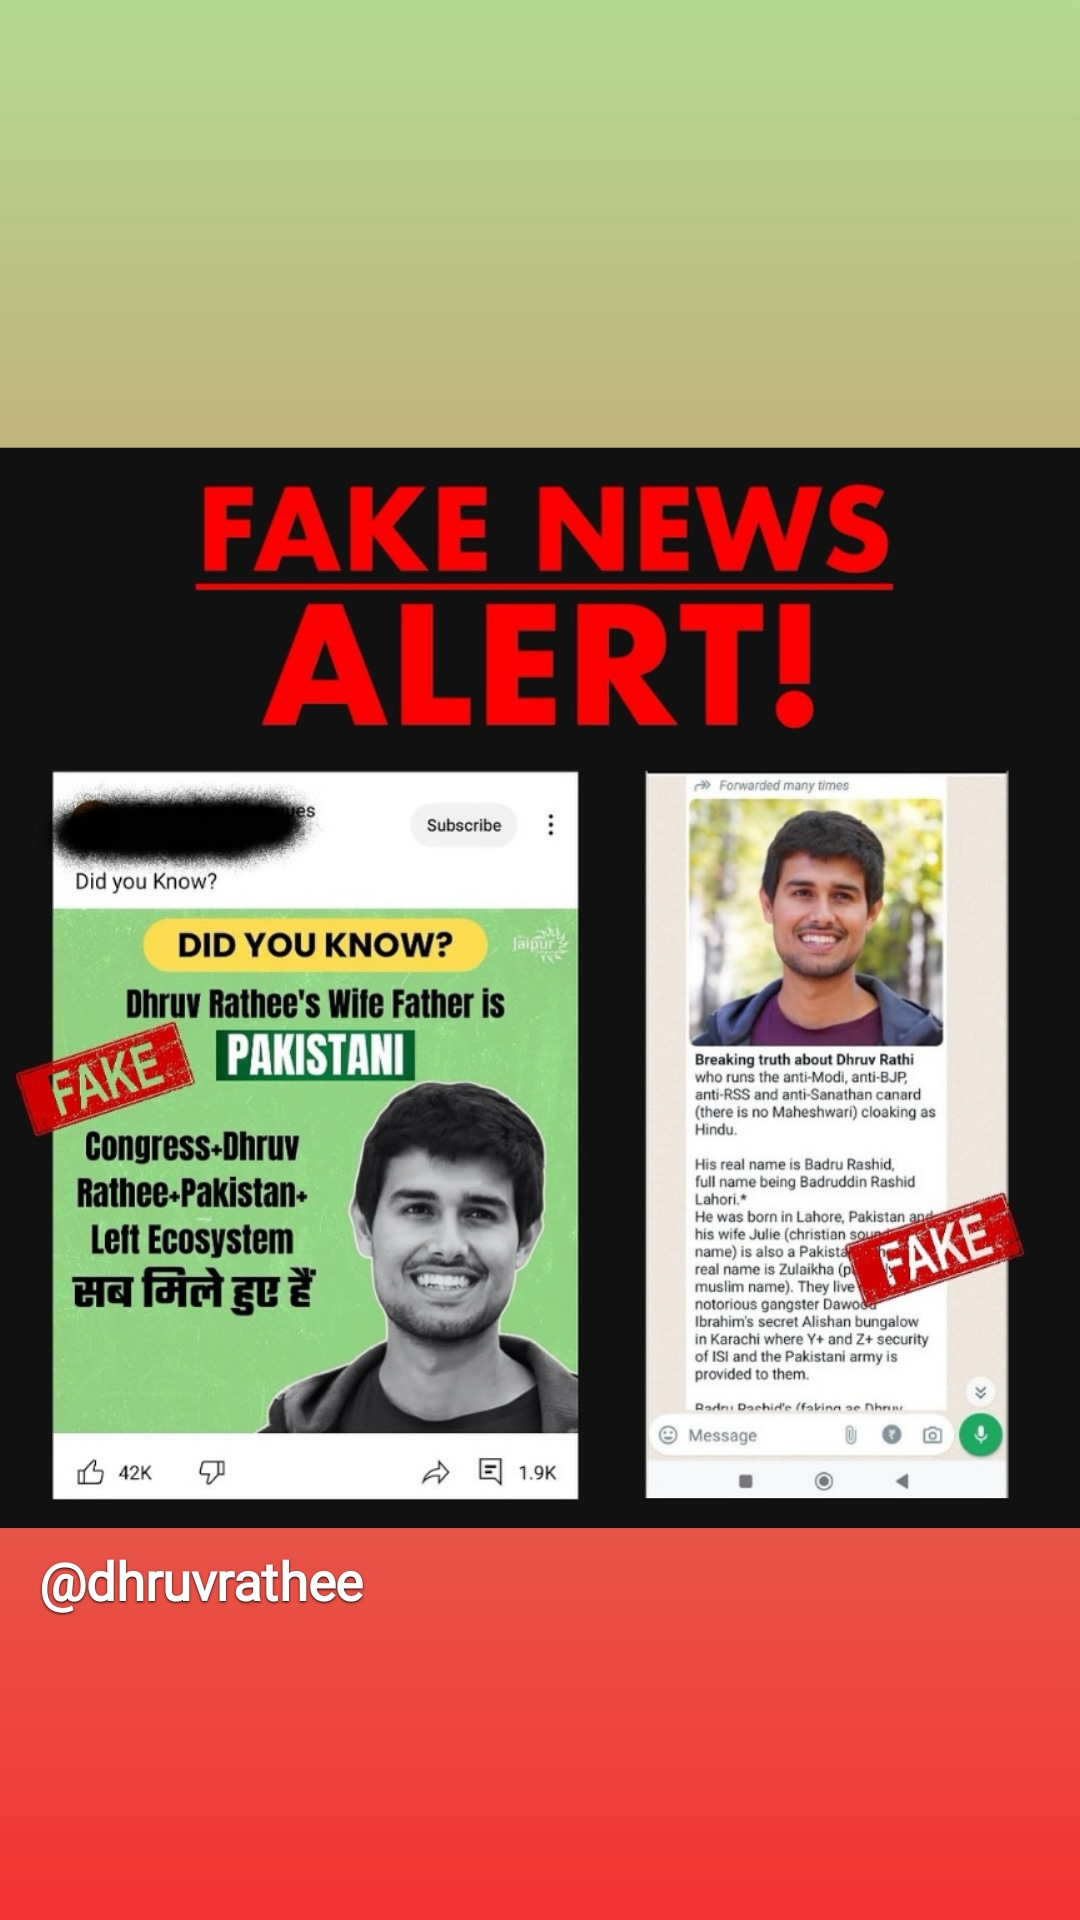 youtuber-dhruv-rathee-responds-to-viral-posts-claiming-his-wife-is-pakistani-how-desperate-do-you-have-to-be